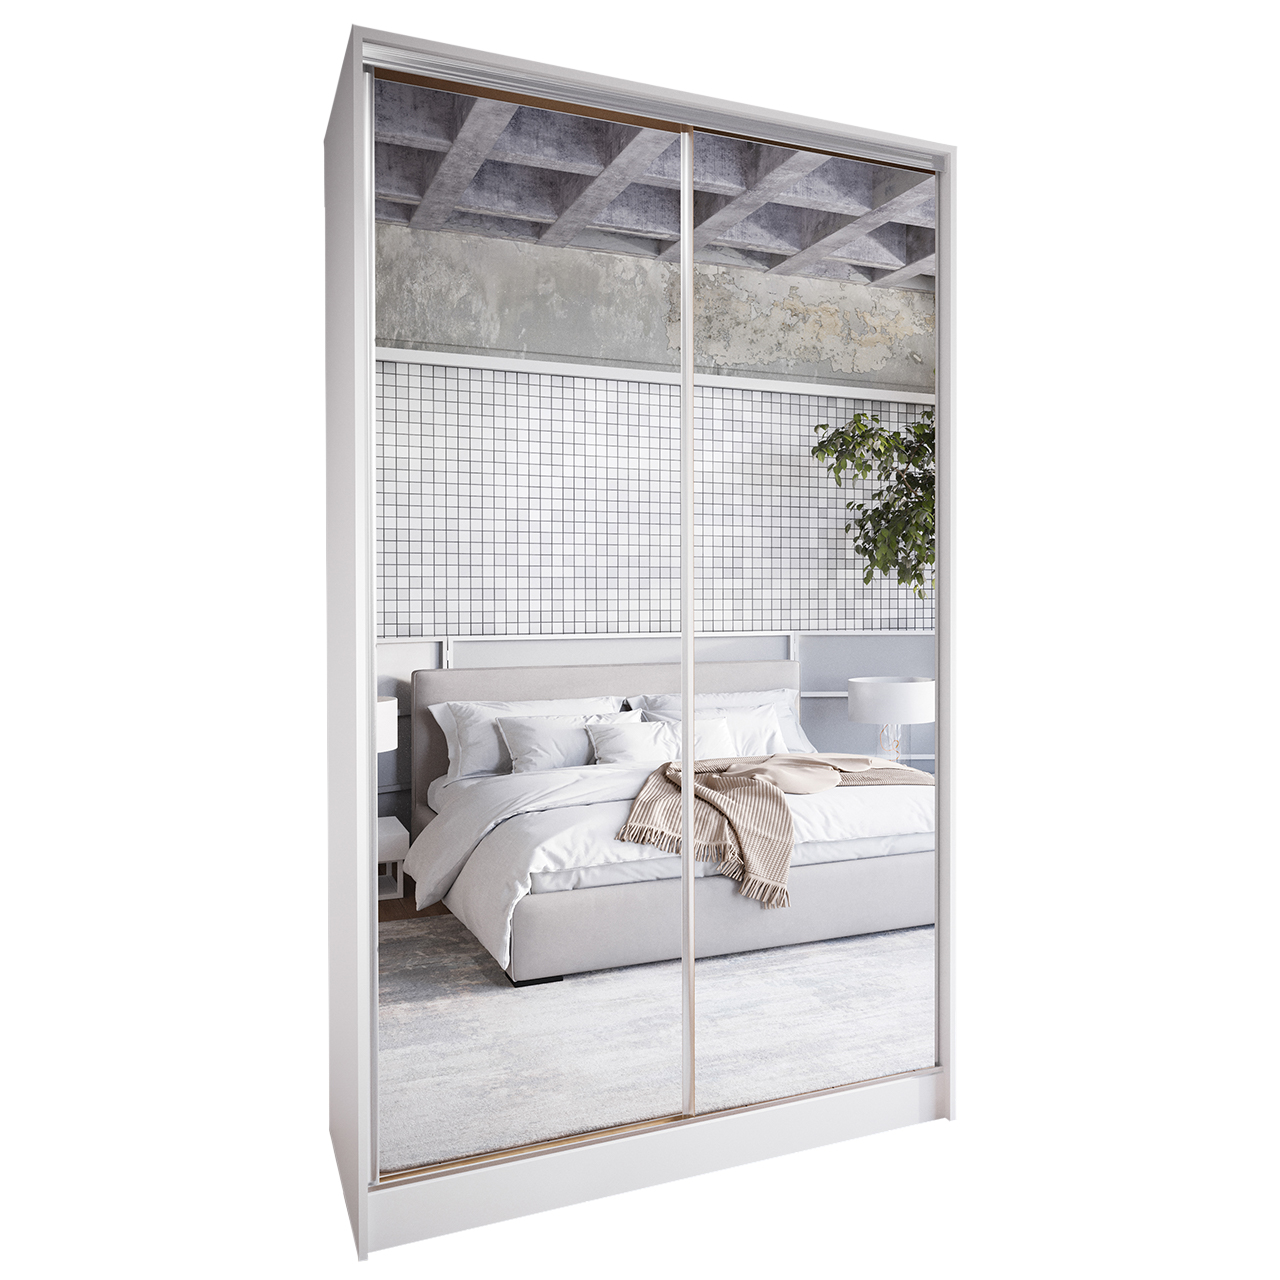 Sliding Wardrobe with Mirror and Drawers GRANO C 120 white